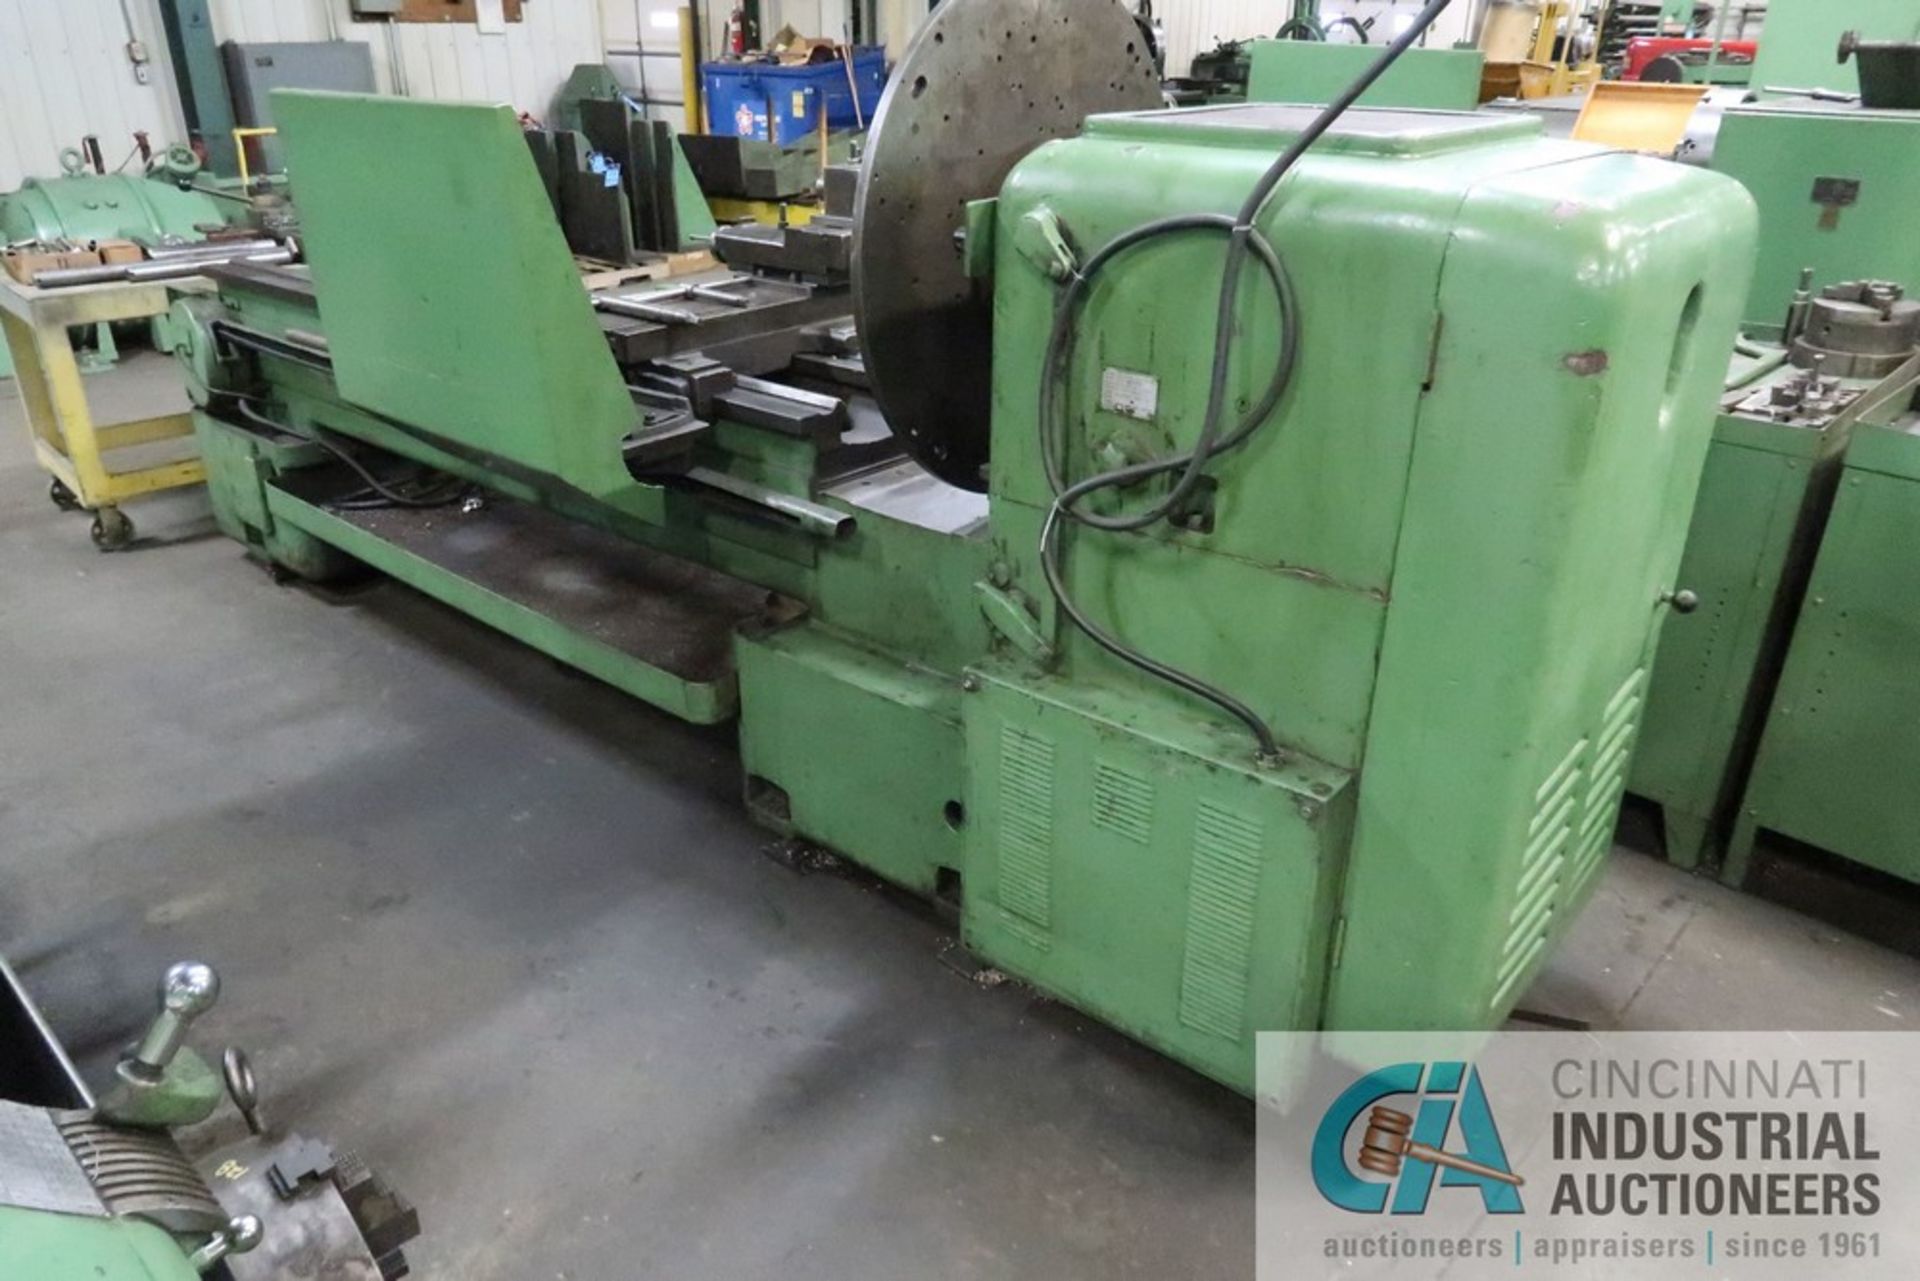 24" / 35" X 96" CLOVER GAP BED LATHE, 2-1/2" SPINDLE HOLE, 33-1/2" FACE PLATE, STEADY REST, WITH - Image 3 of 15